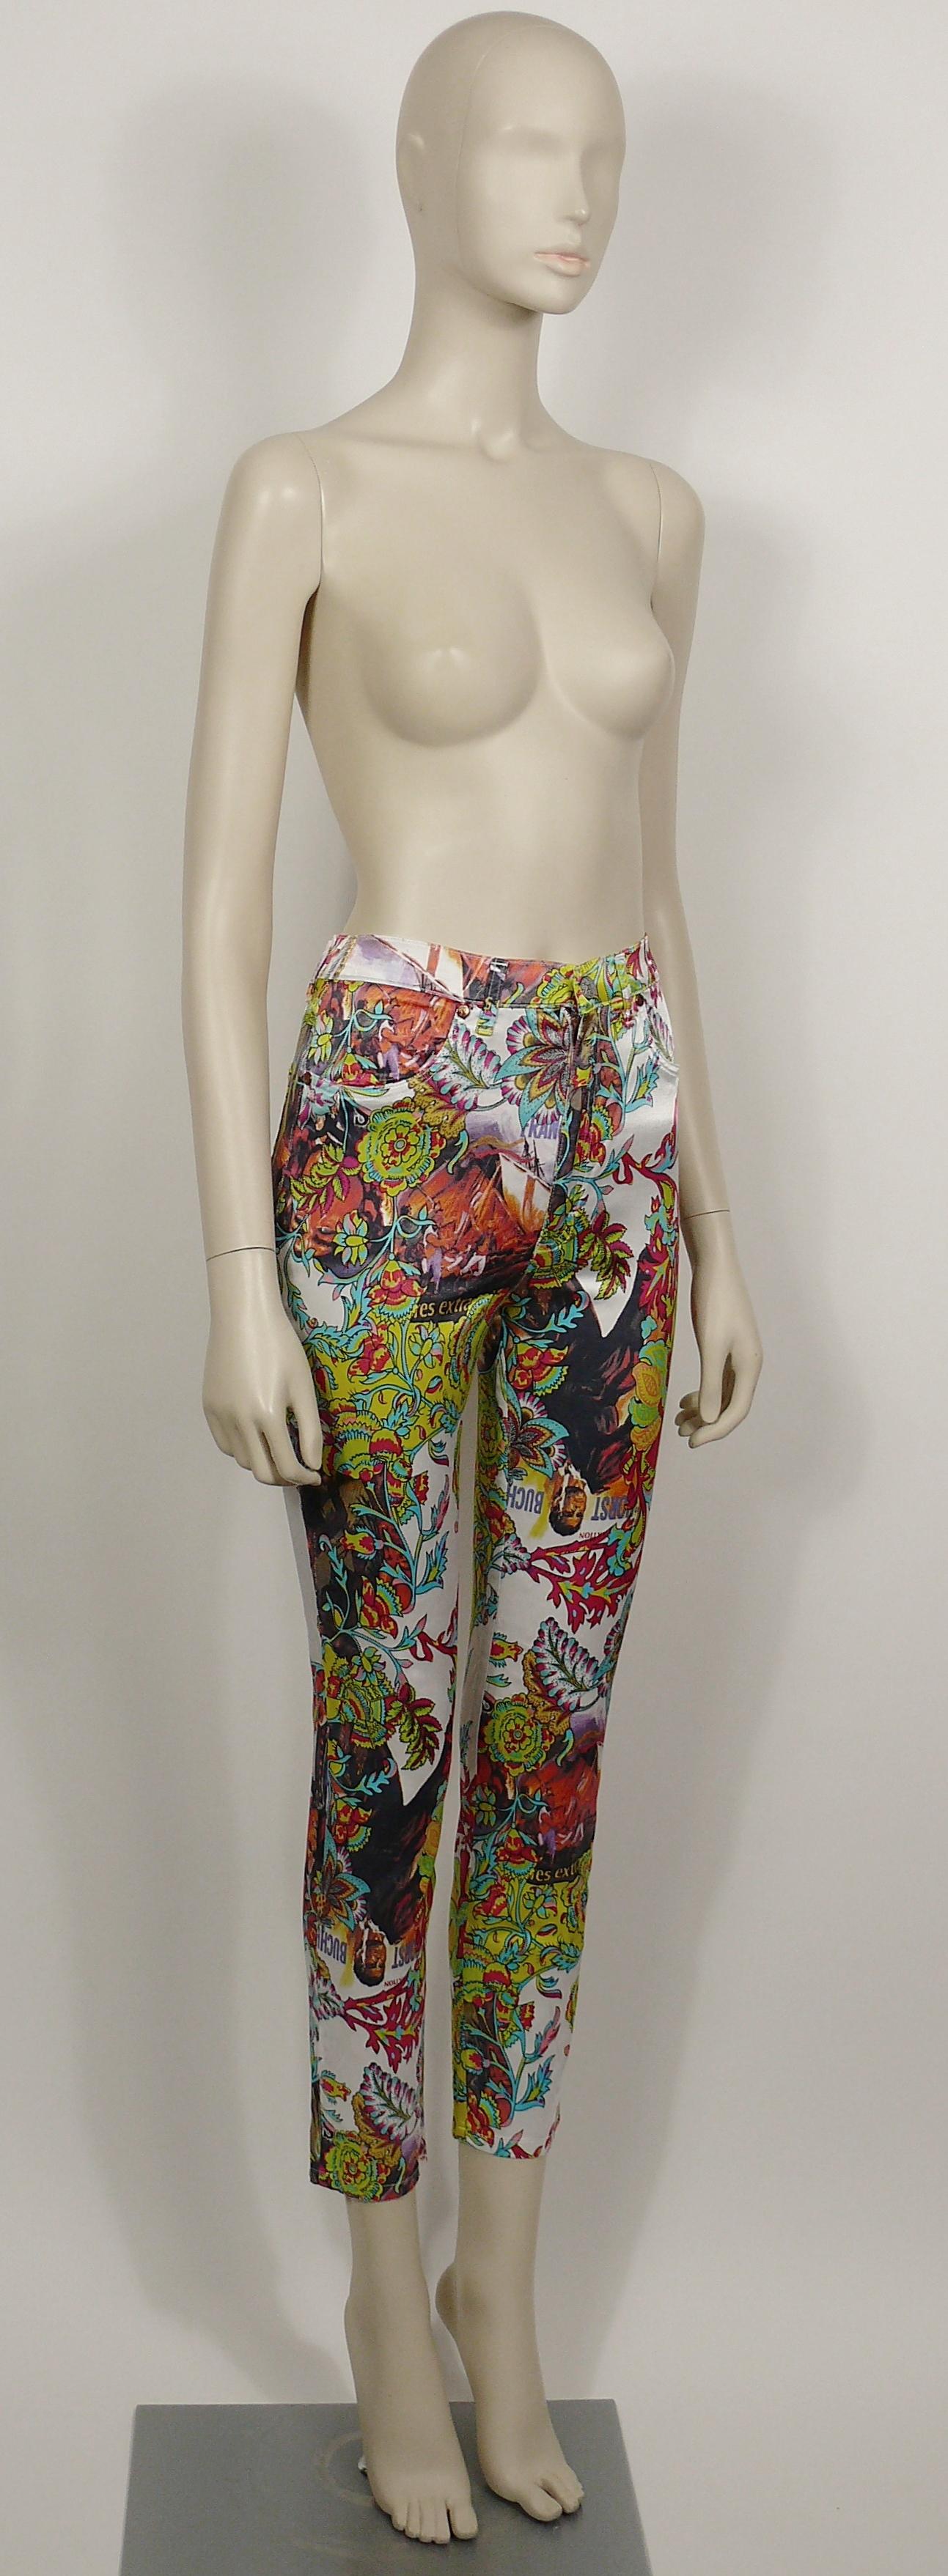 CHRISTIAN LACROIX vintage colourful floral print pants trousers featuring actor HORST BUCHOLZ posters.

Waist button and zippered closure.
Two faux front pockets.
Two back pockets.
Belt loops.
CL signature copper toned rivets.
Has stretch.

Label